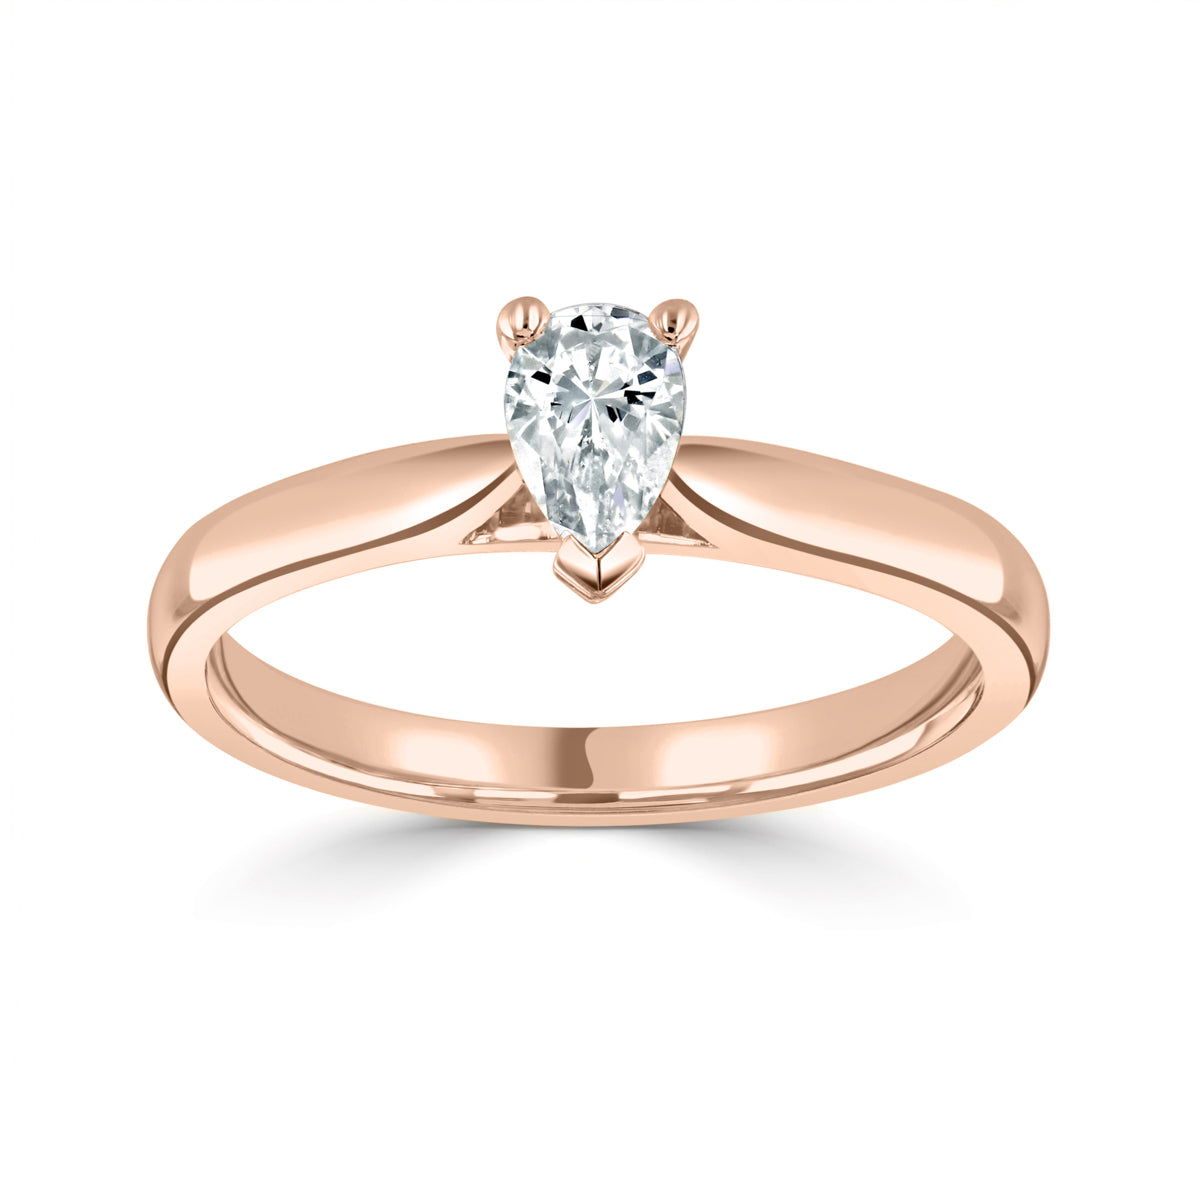 Pear cut diamond set into a classic 3 claw setting engagement ring